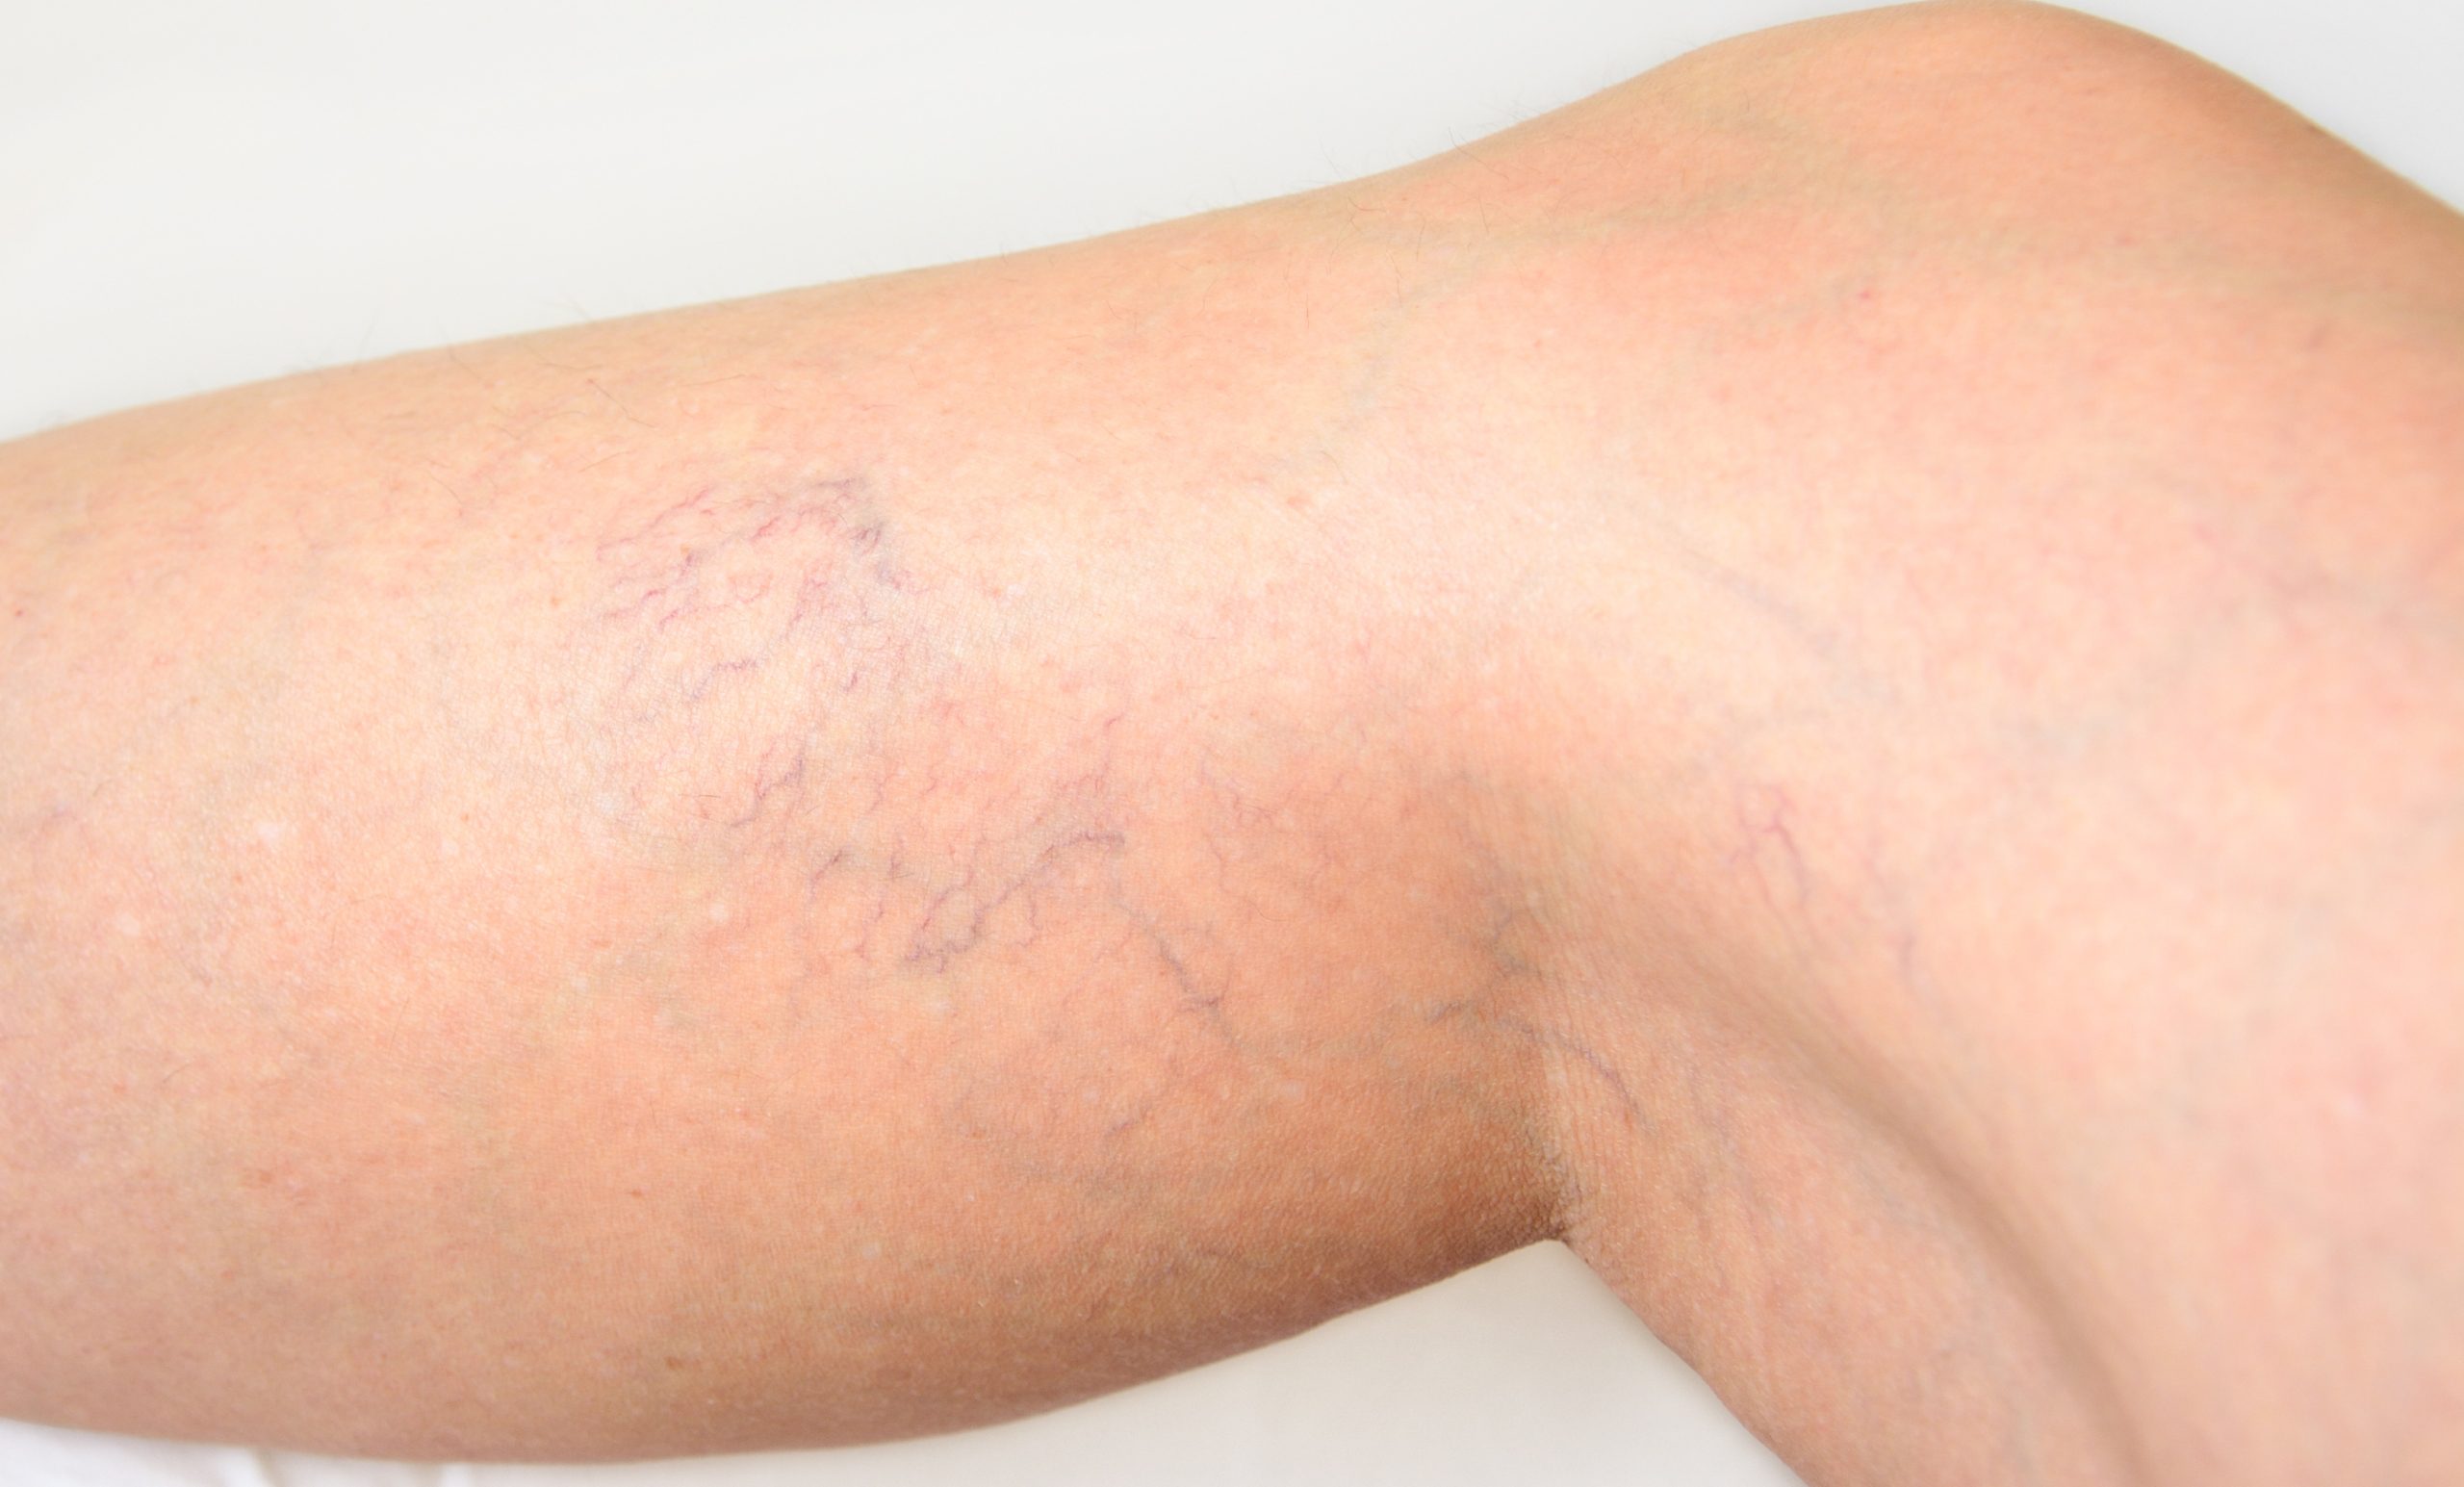 How Long Do I Wear Compression Stockings After Spider Vein Treatment?